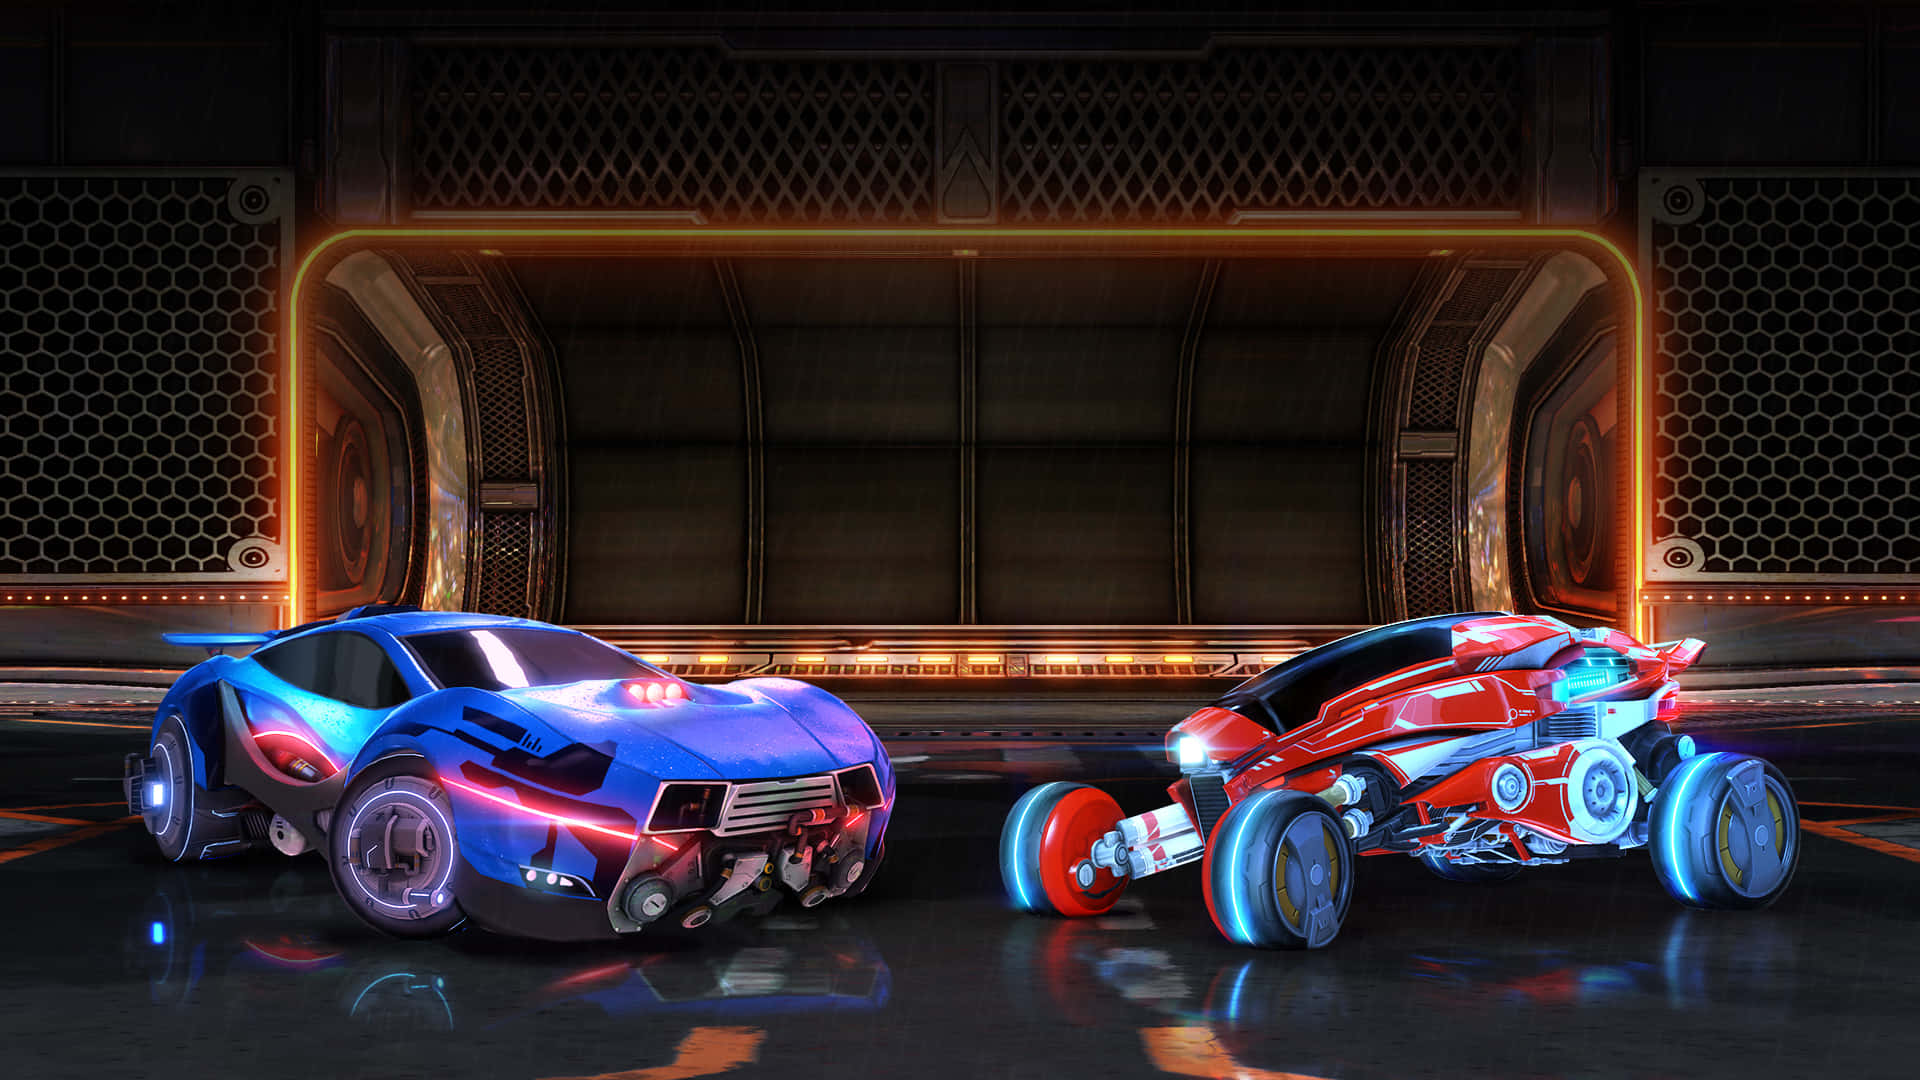 Get Ready To Play Rocket League In Immersive 1080P